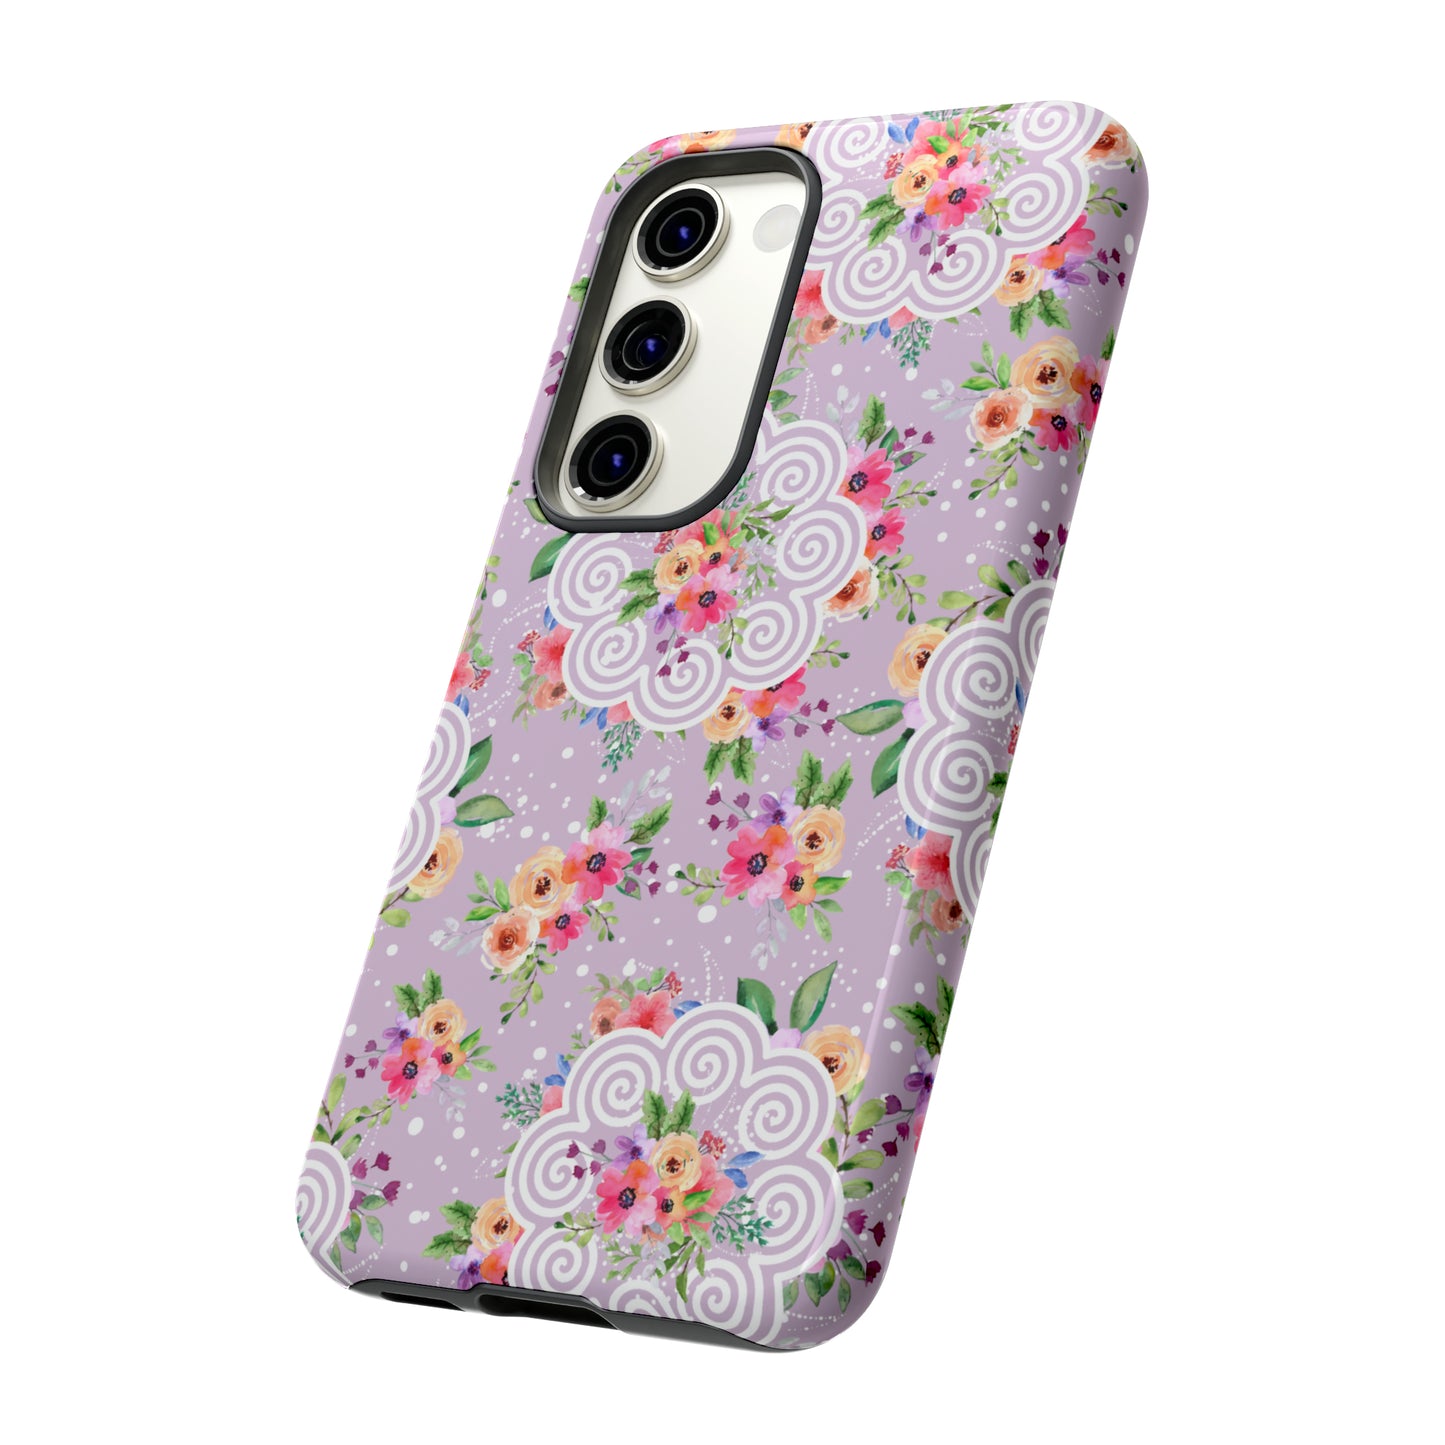 Phone Case Floral Hmong Inspired